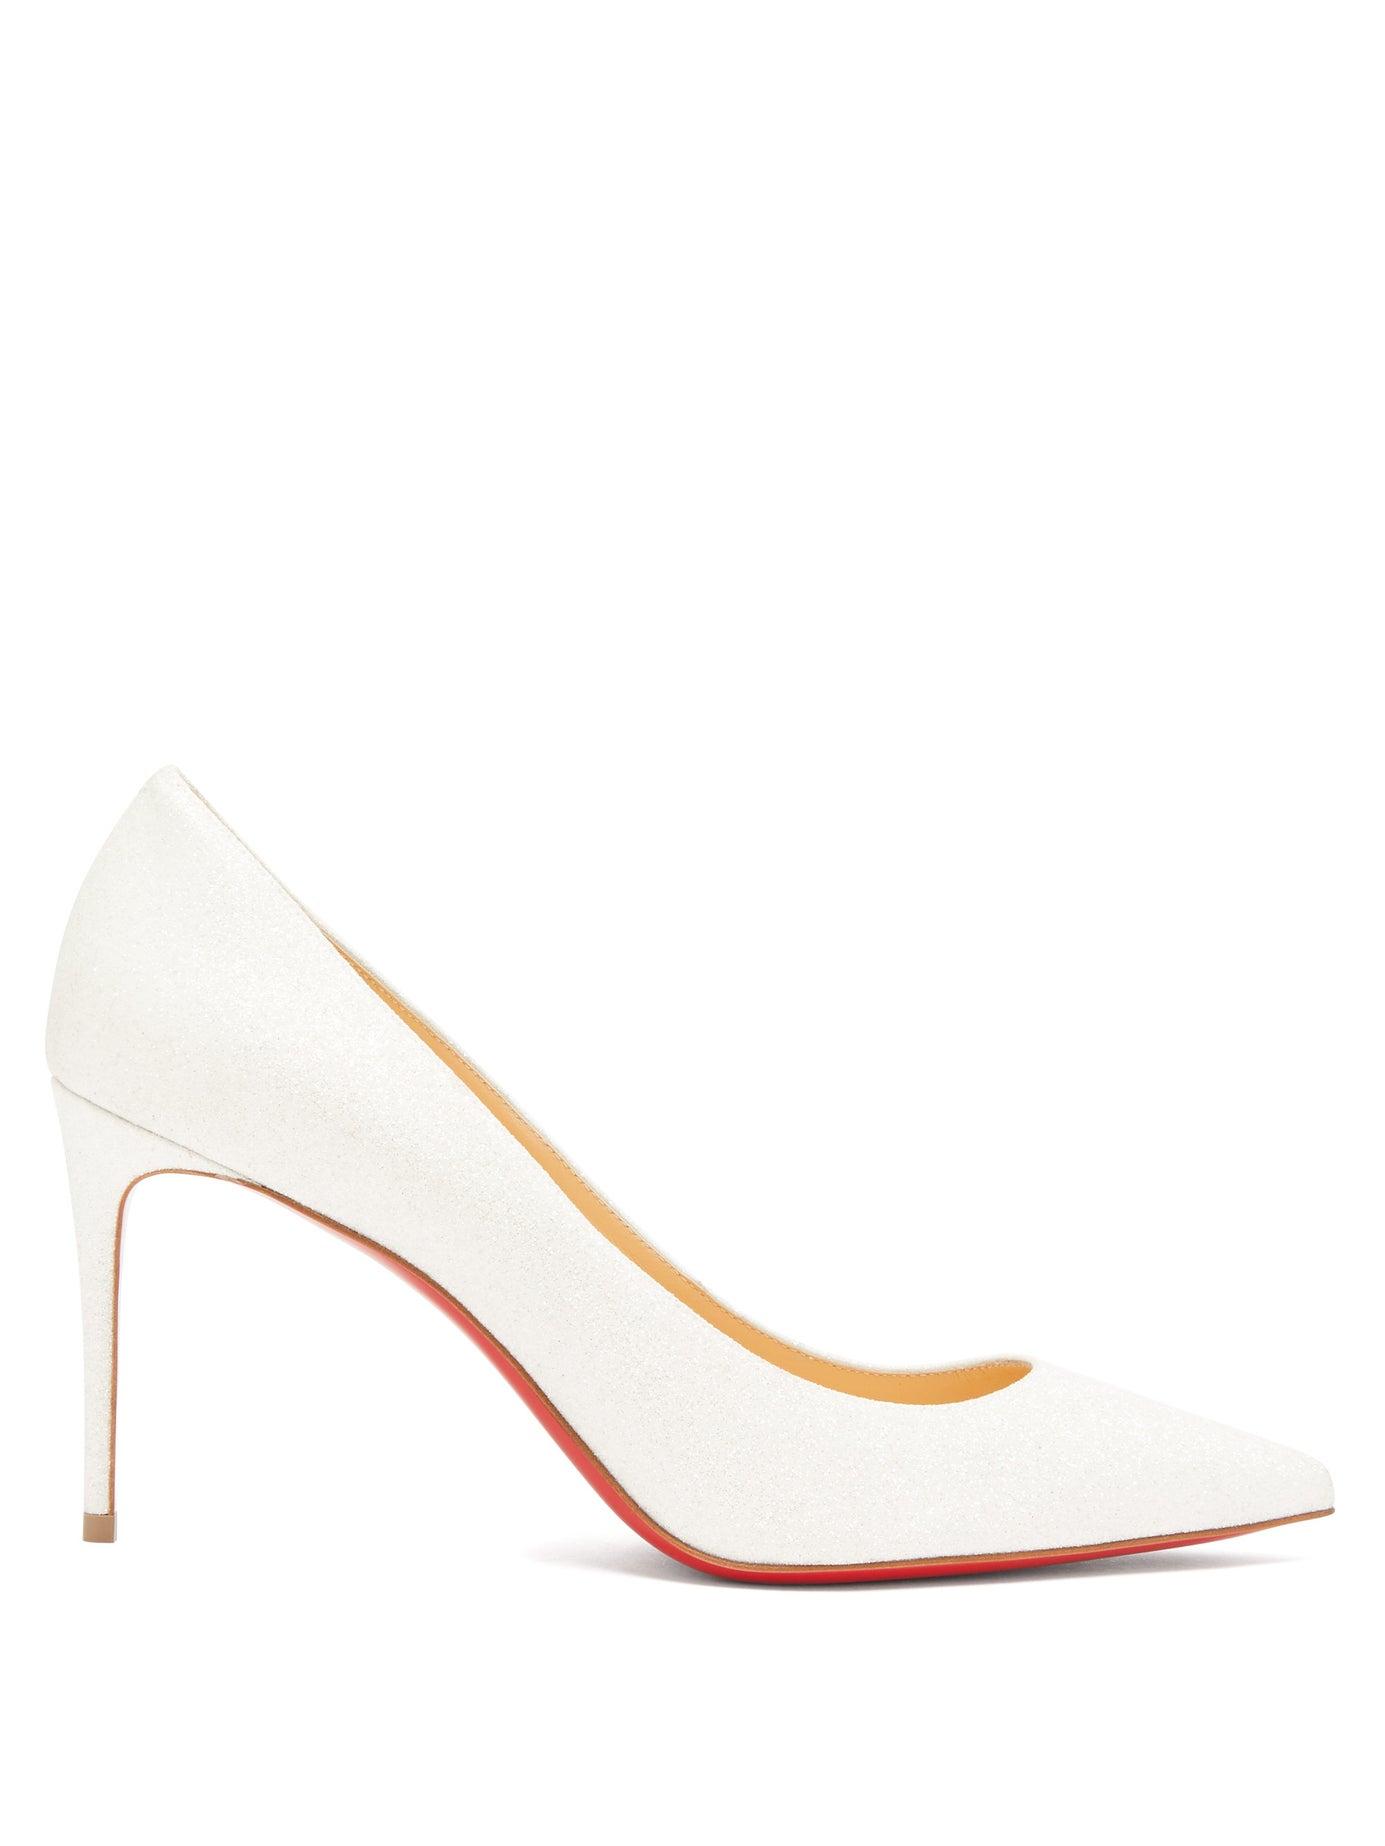 Christian Louboutin Kate 85 Glitter Leather Pumps in White | Lyst Canada